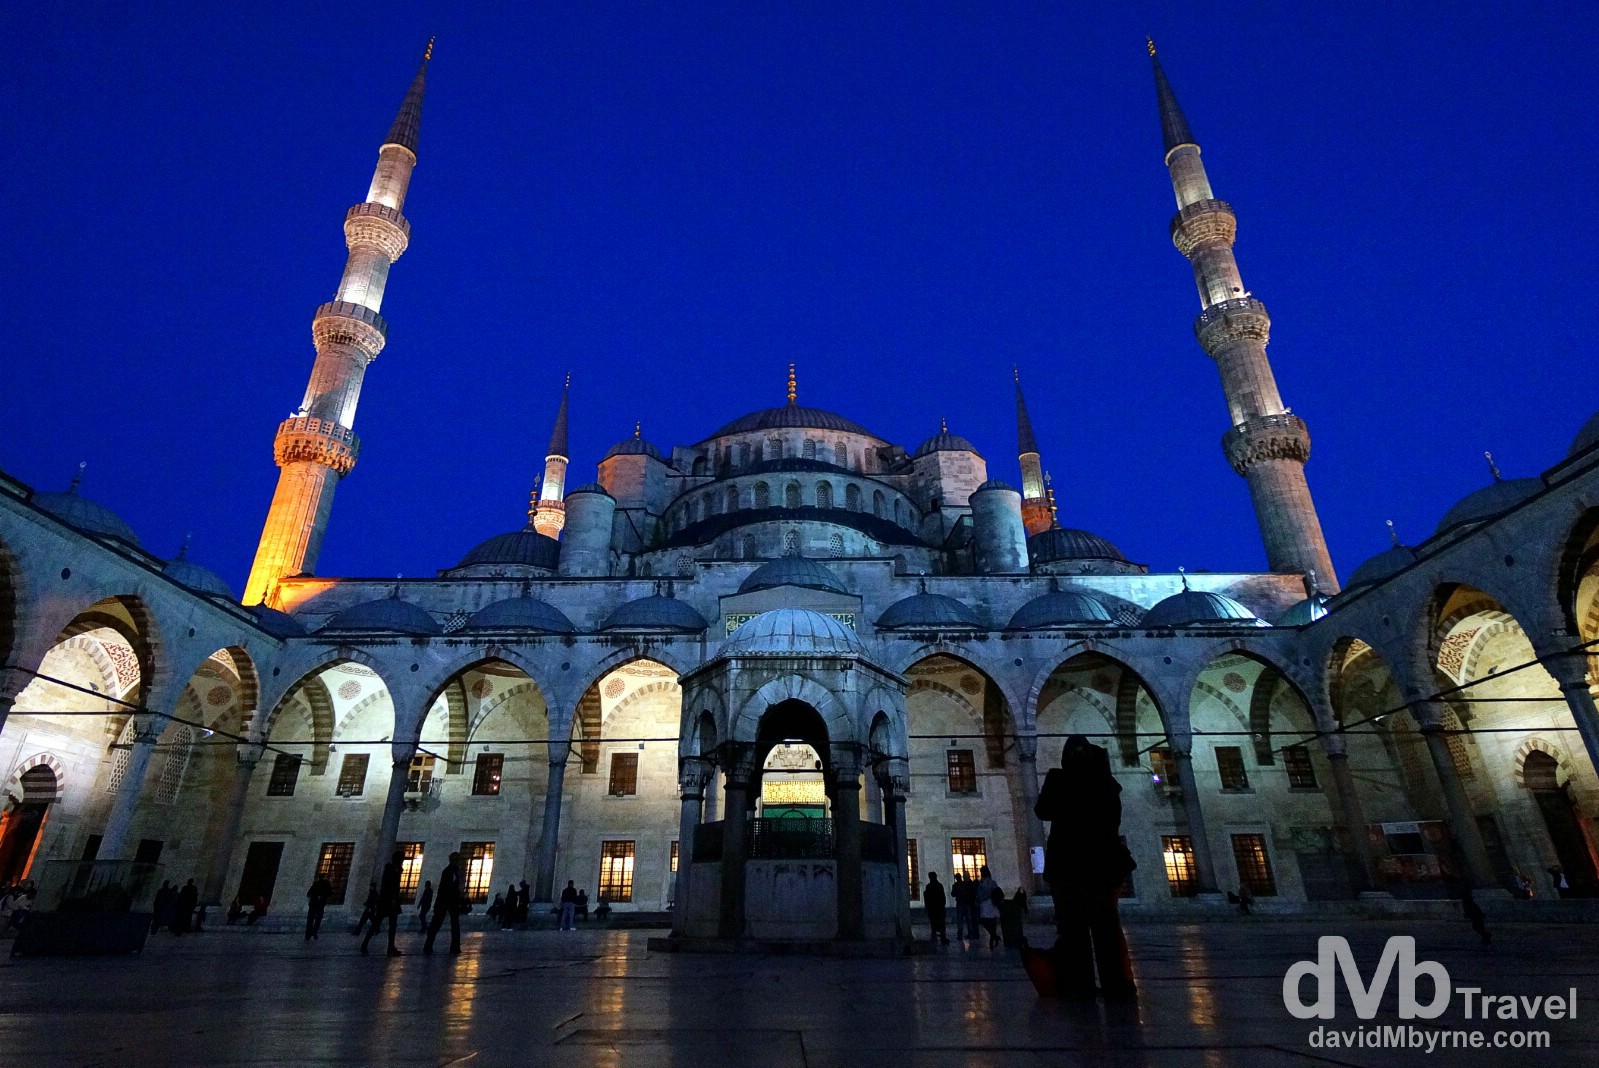 The inner courtyard of the Sultan Ahmed Mosque, aka The Blue Mosque, in Istanbul, Turkey. April 9th, 2014.